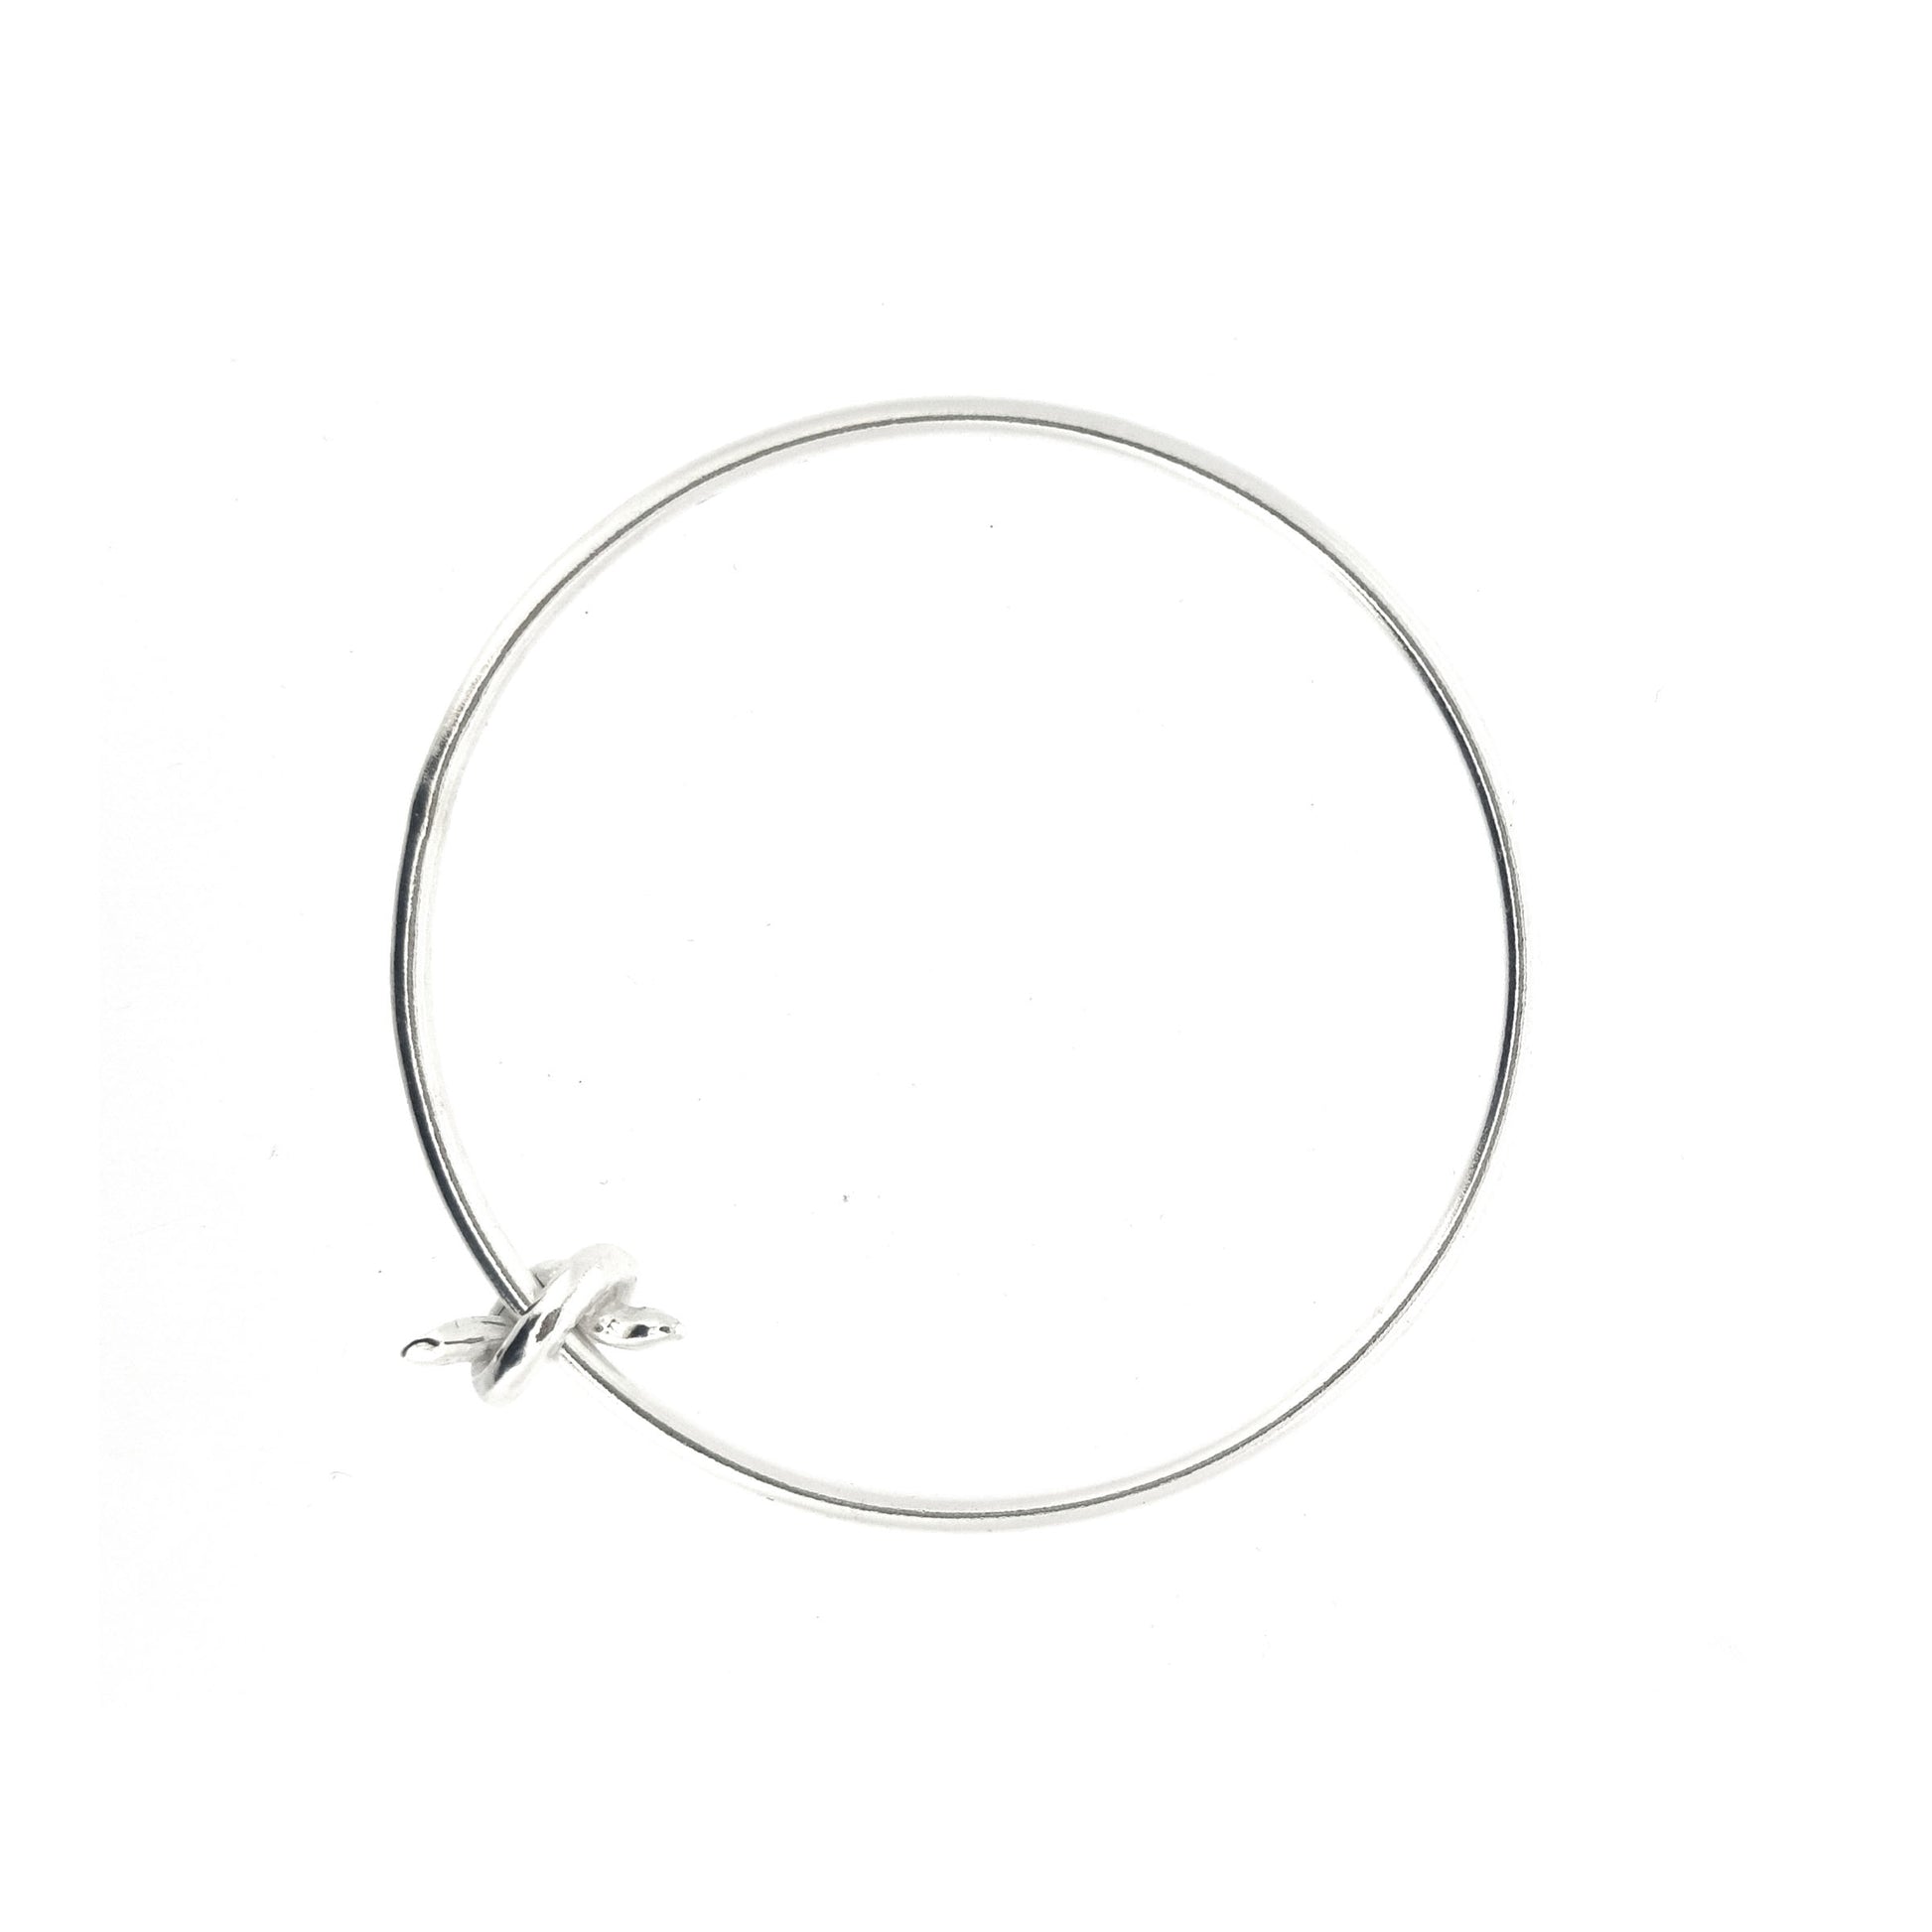 Silver round bangle with spinning knot charm.